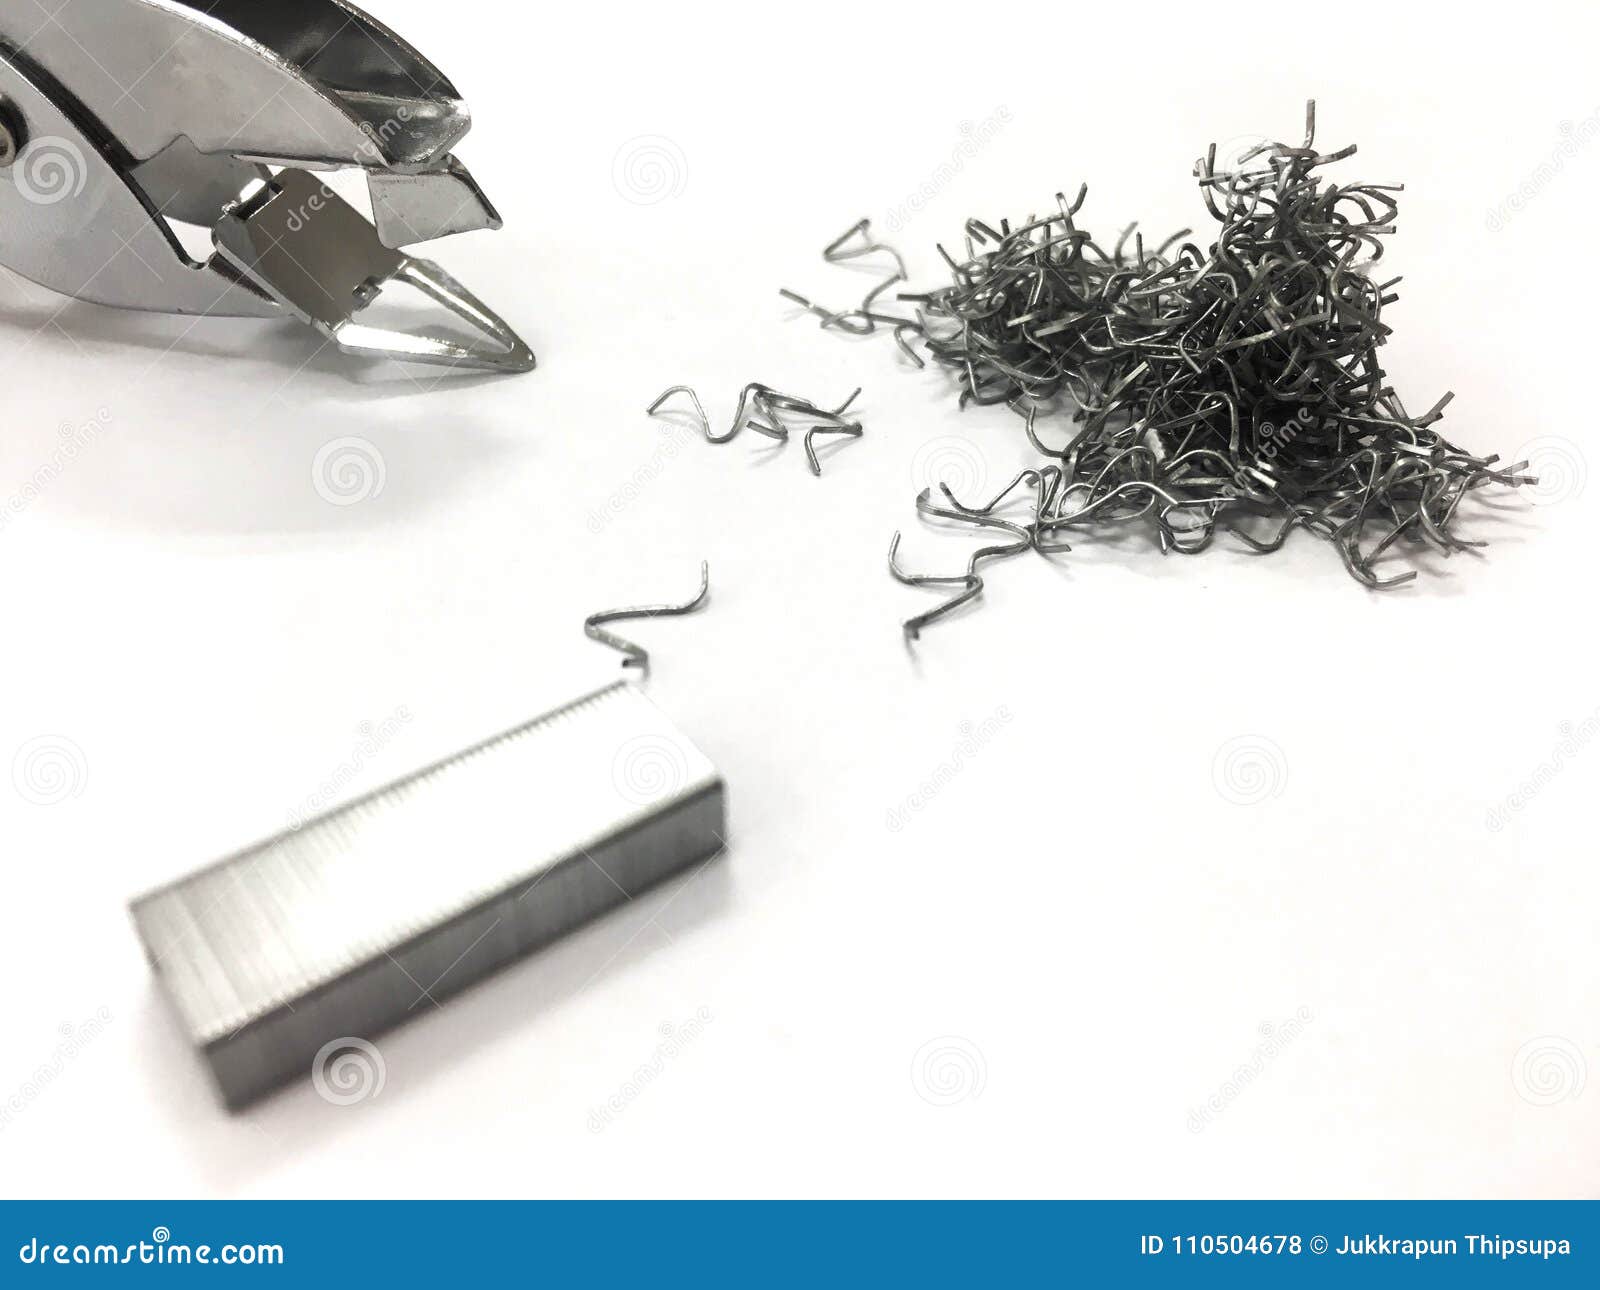 Staple Stapler Staples are Pulled Out. Stock Photo - Image of grey ...